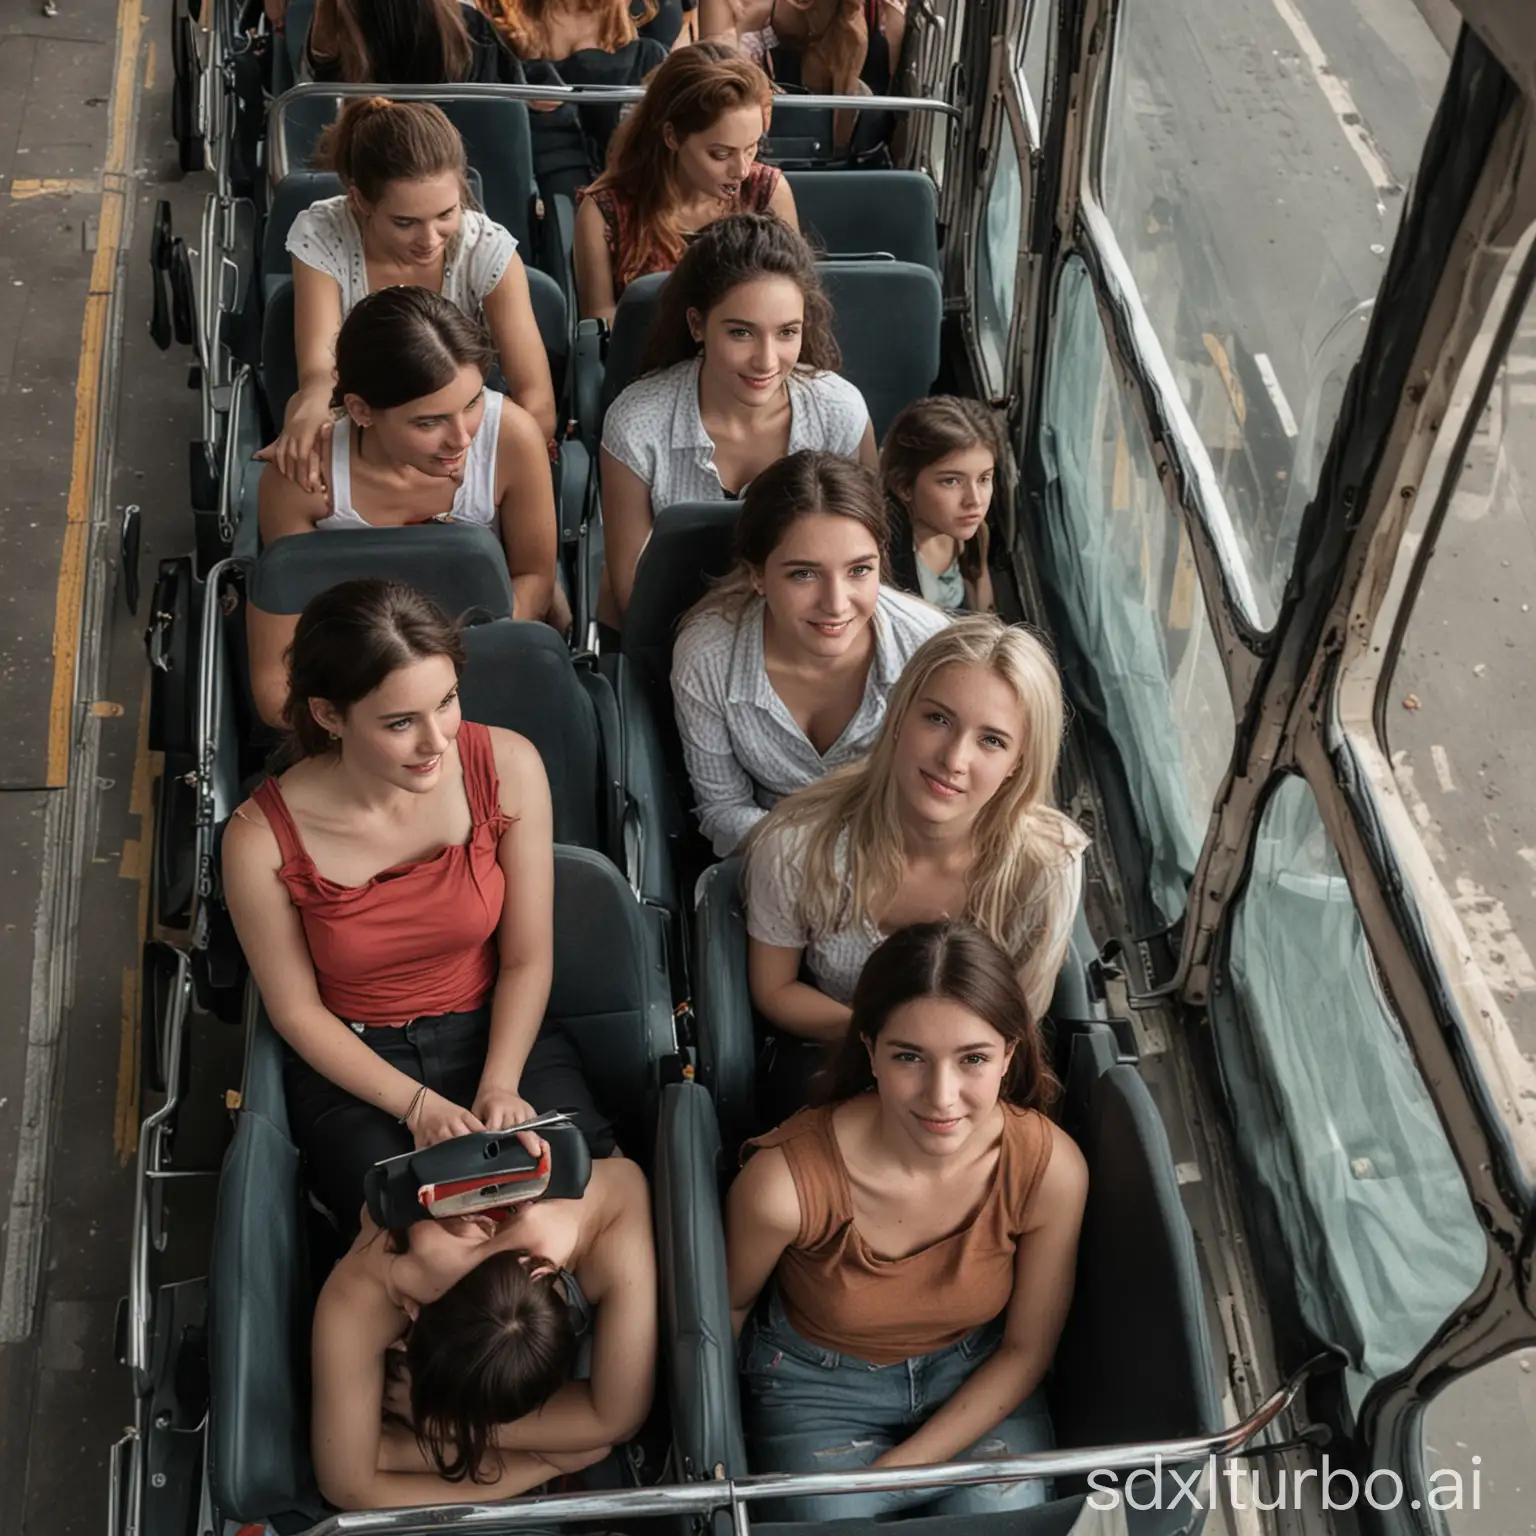 Top down view, women sitting on seats inside the bus